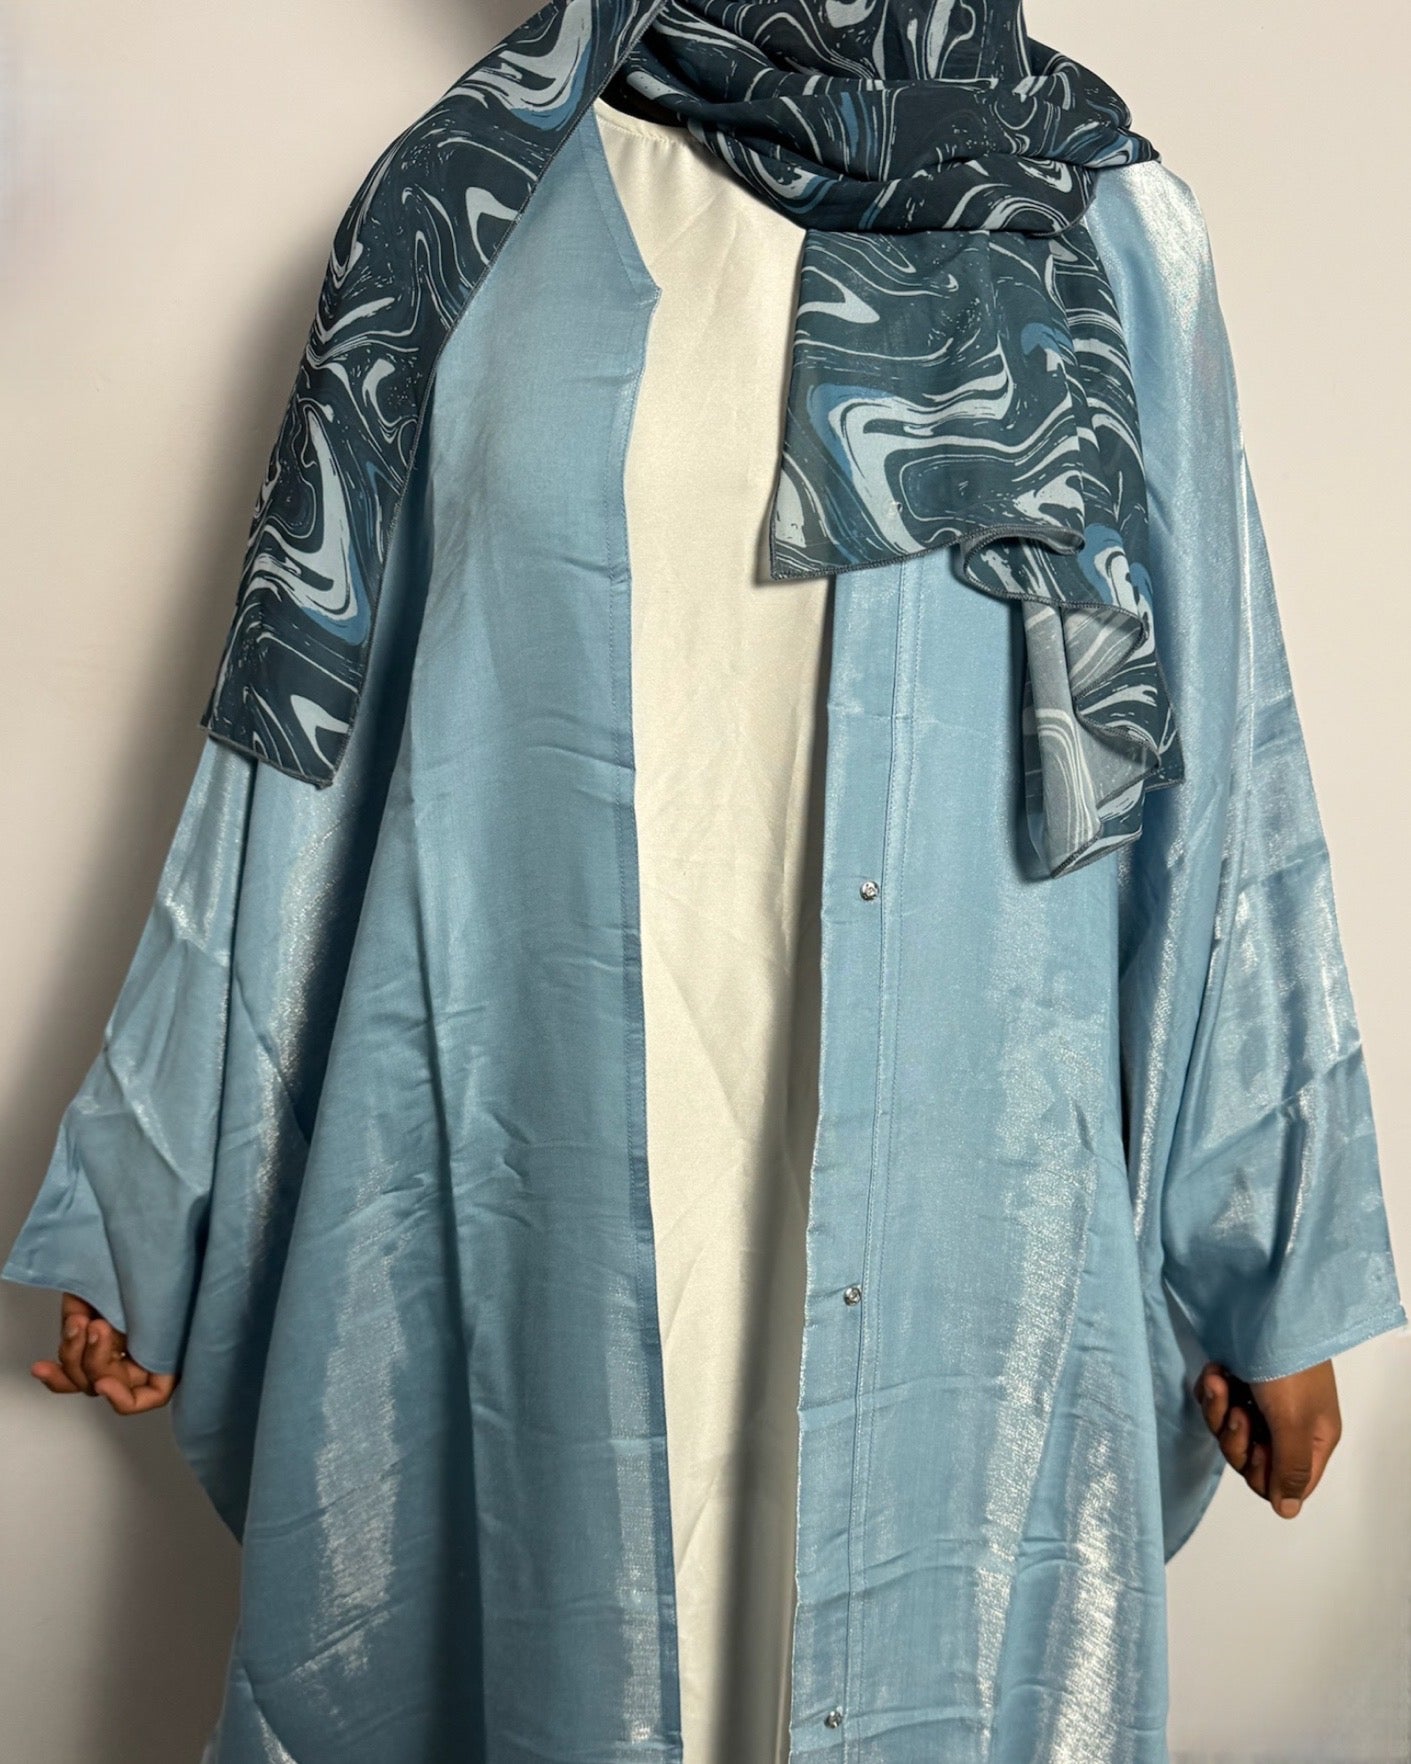 The Open Butterfly Abaya